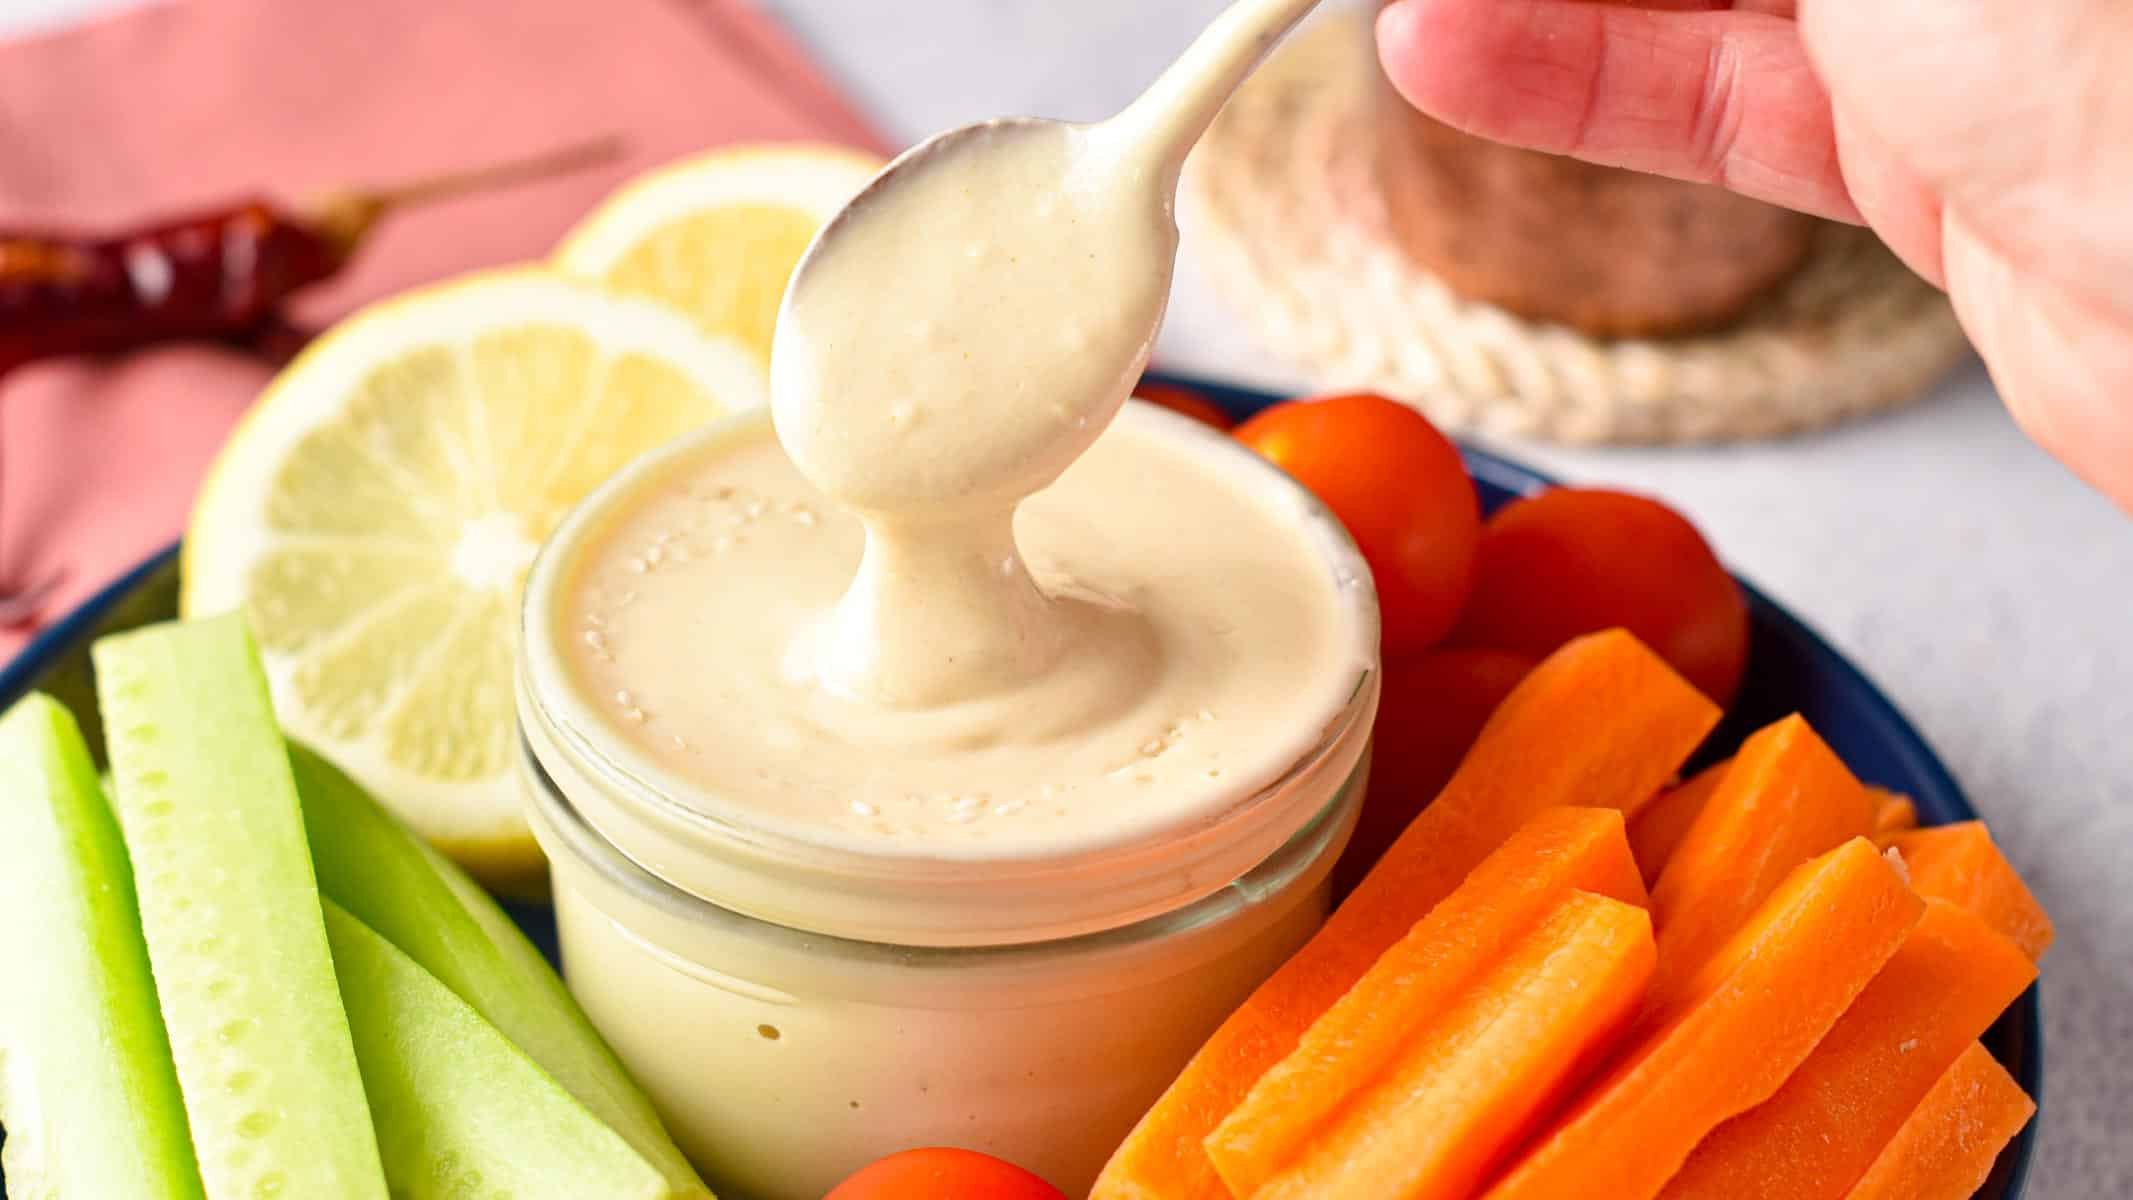 This Tahini Sauce is a creamy dairy-free sauce packed with plant-based proteins from sesame seeds and delicious on top of salad, roasted vegetables or as a tahini salad dressing.